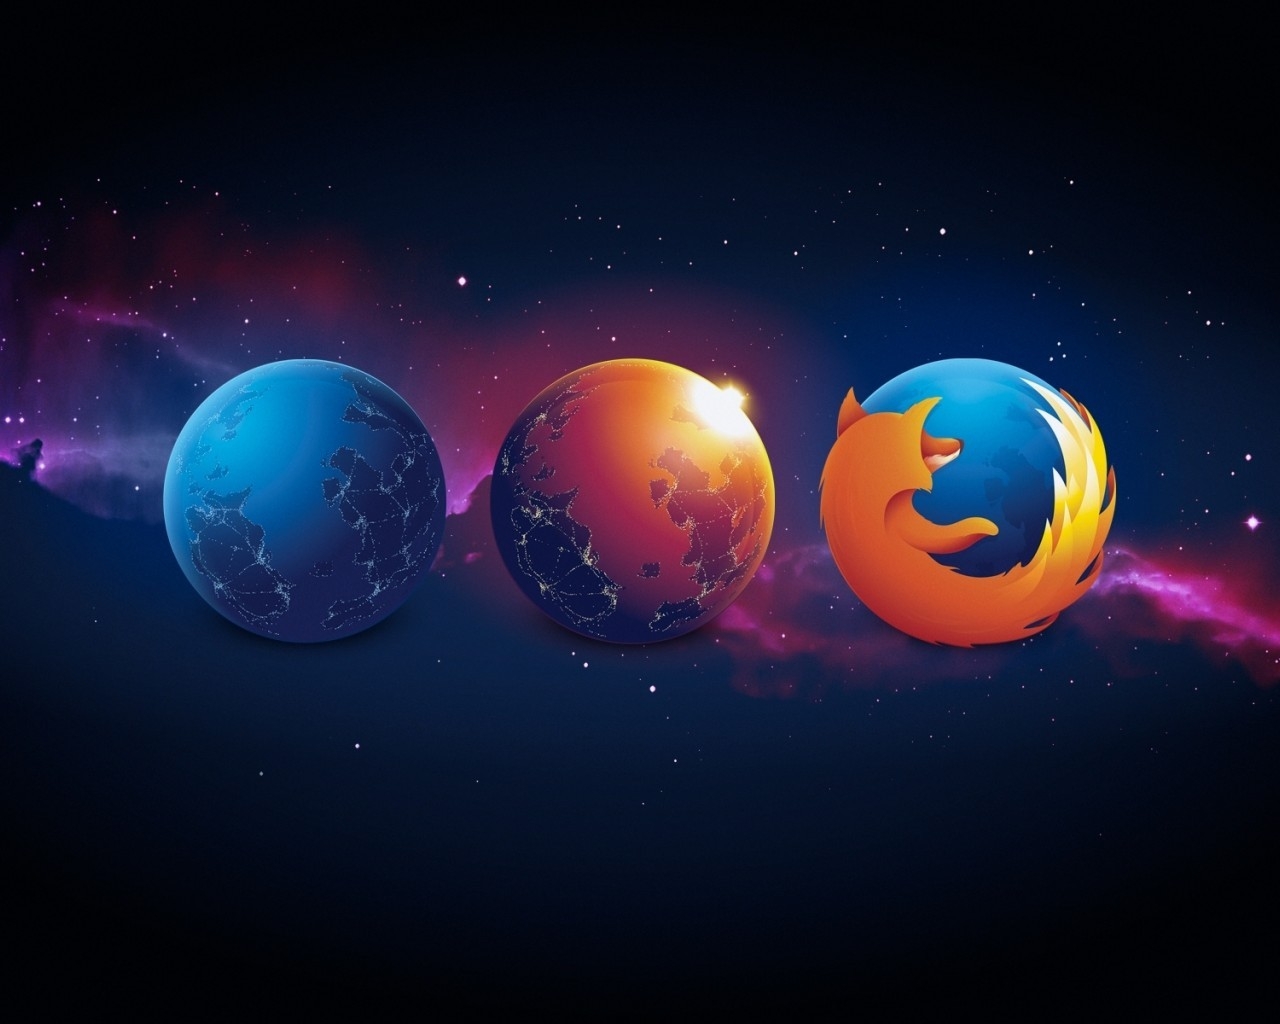 Firefox Planet for 1280 x 1024 resolution